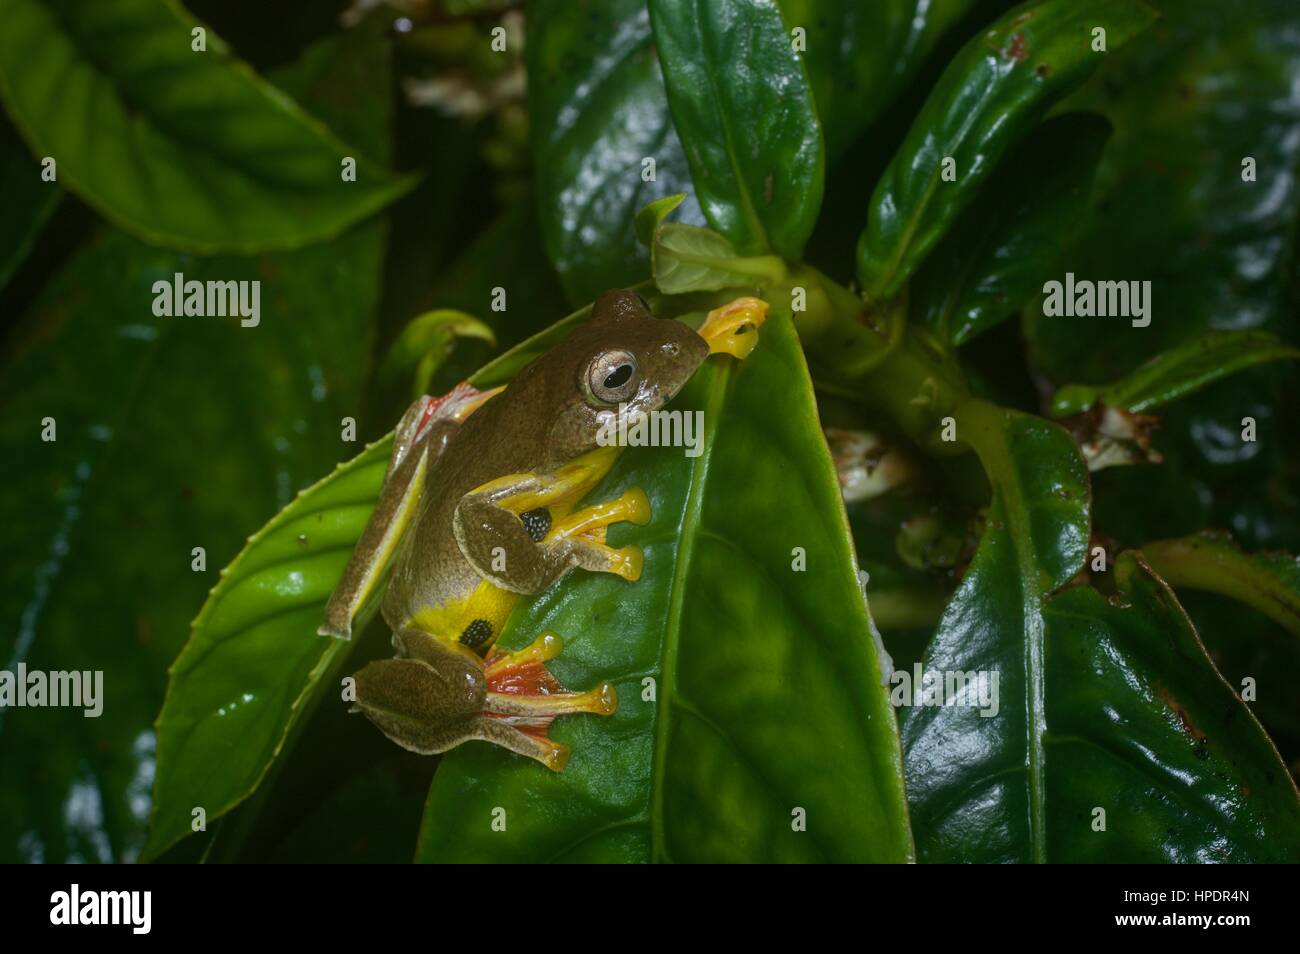 A Twin-spotted Flying Frog (Rhacophorus bipunctatus) in the rainforest at night in Genting Highlands, Pahang, Malaysia Stock Photo